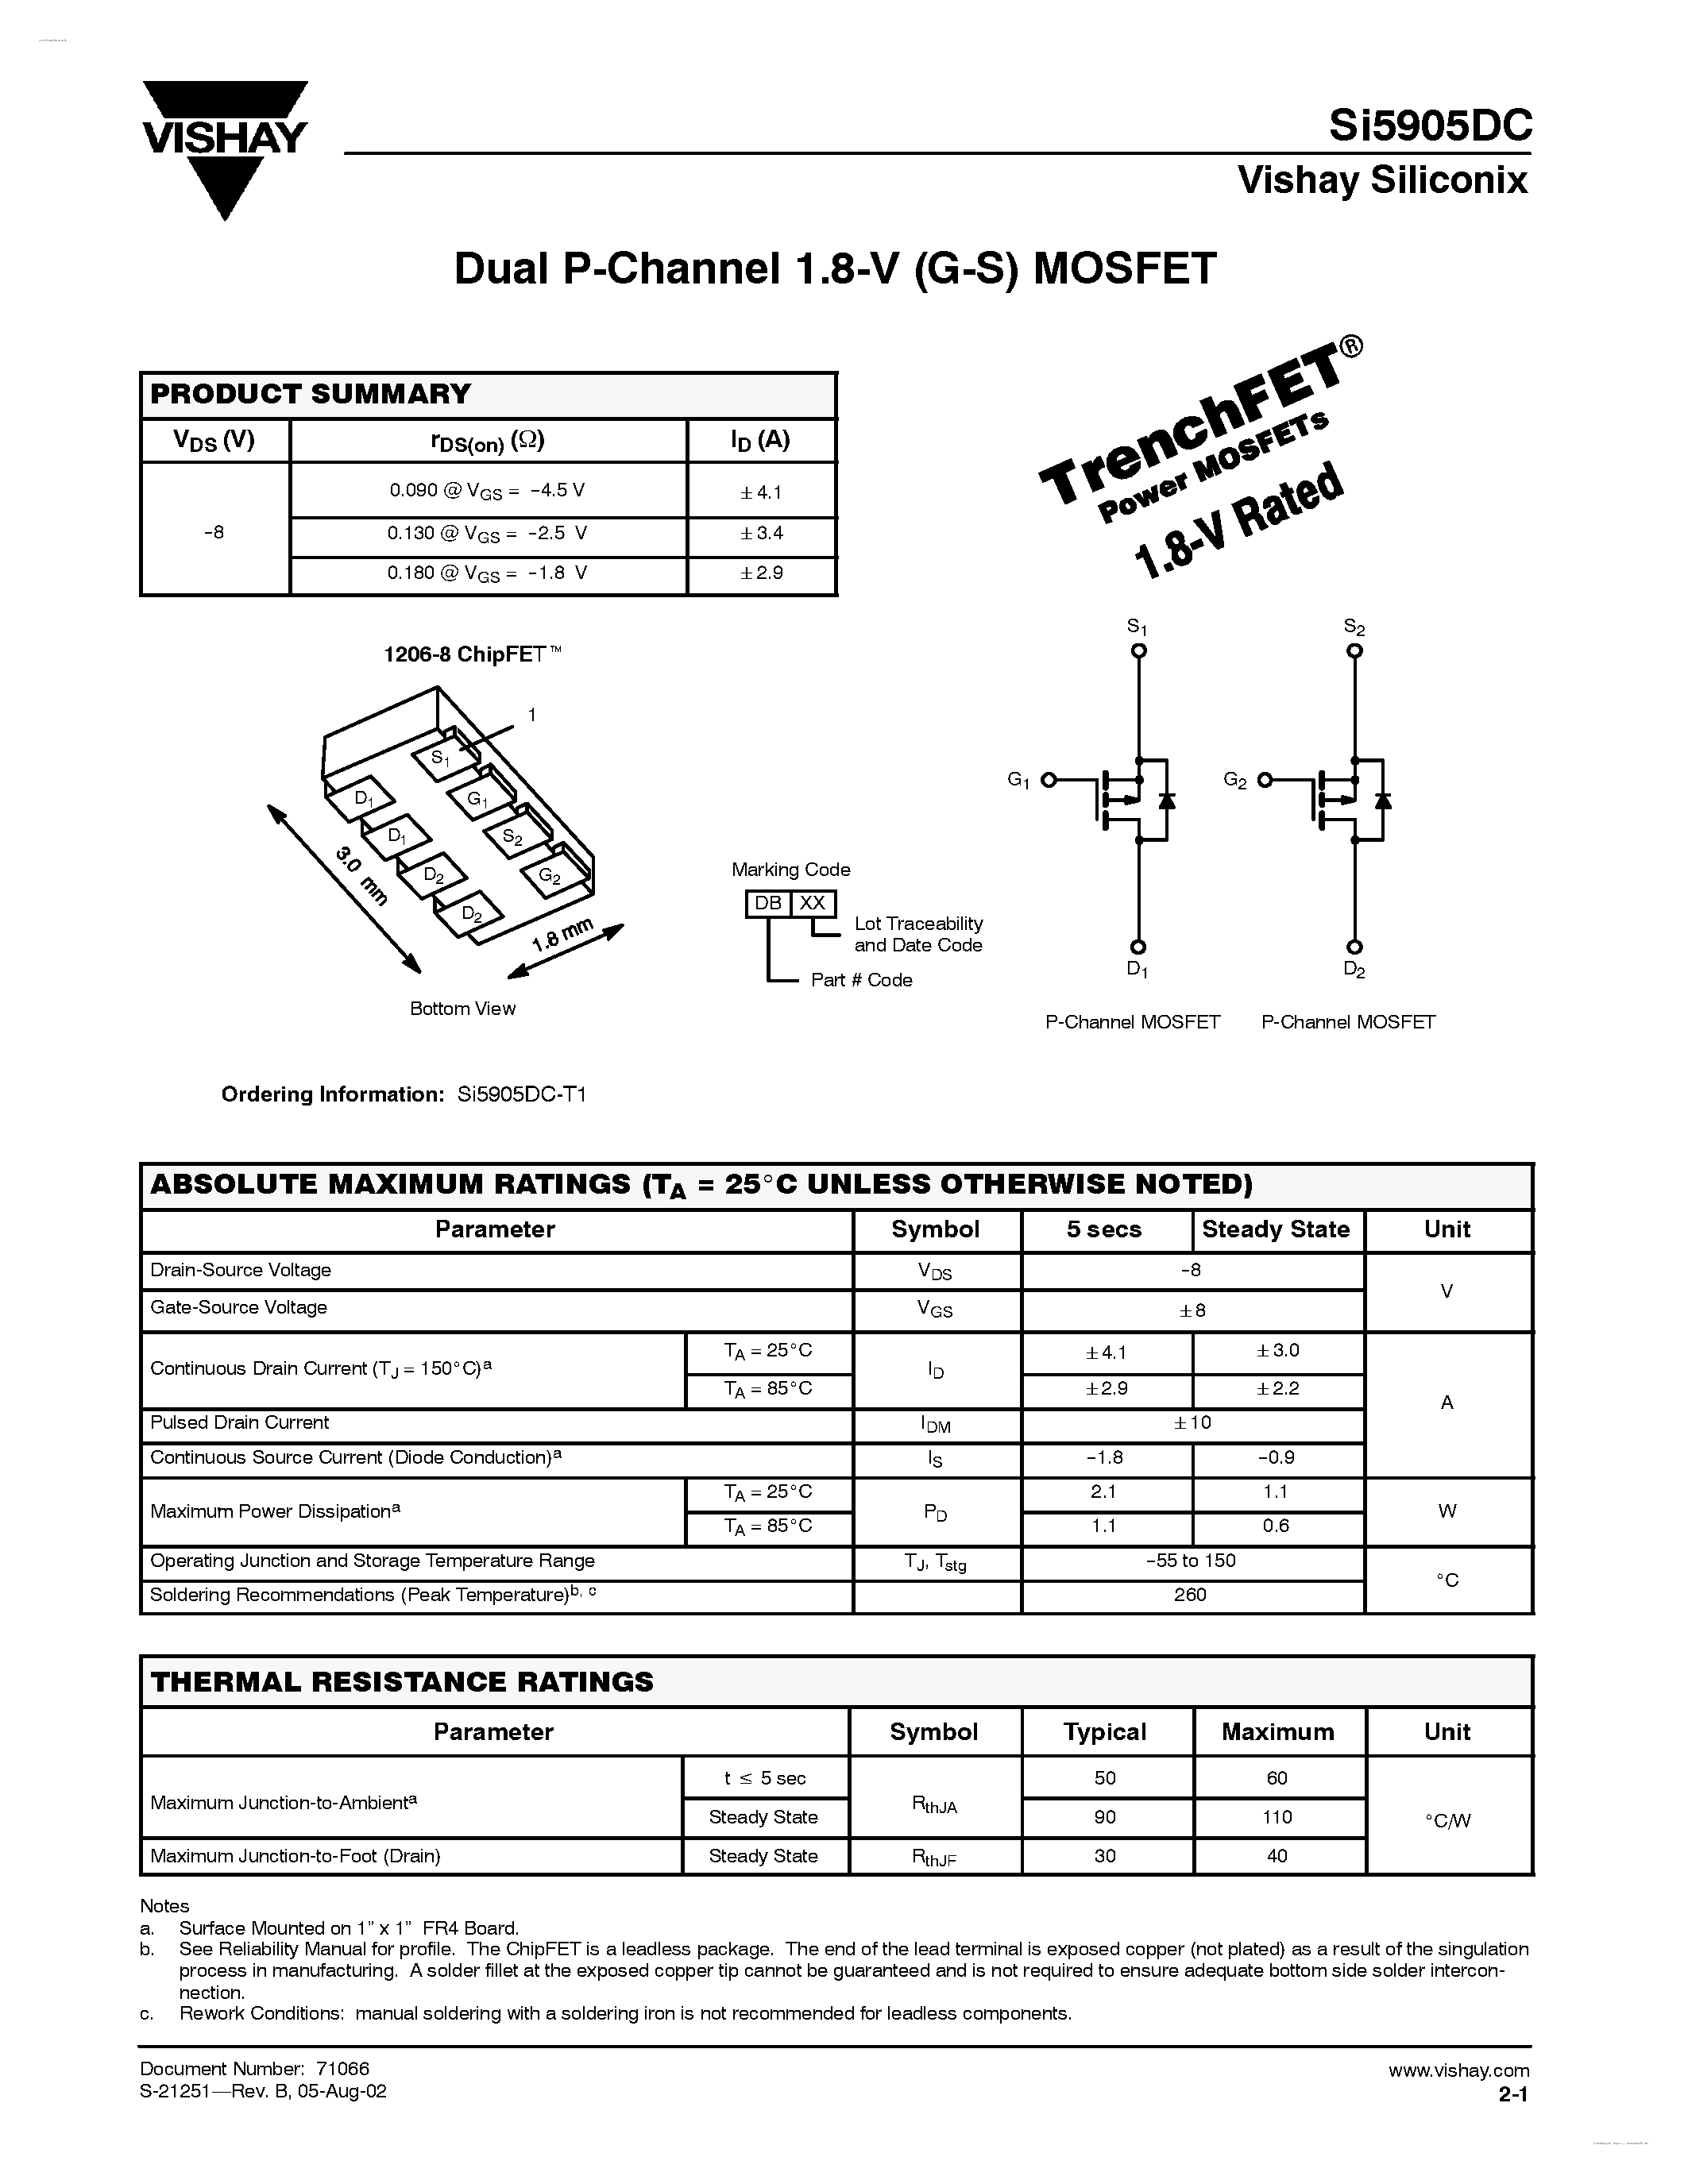 Datasheet SI5905DC - Dual P-Channel 1.8-V (G-S) MOSFET page 1